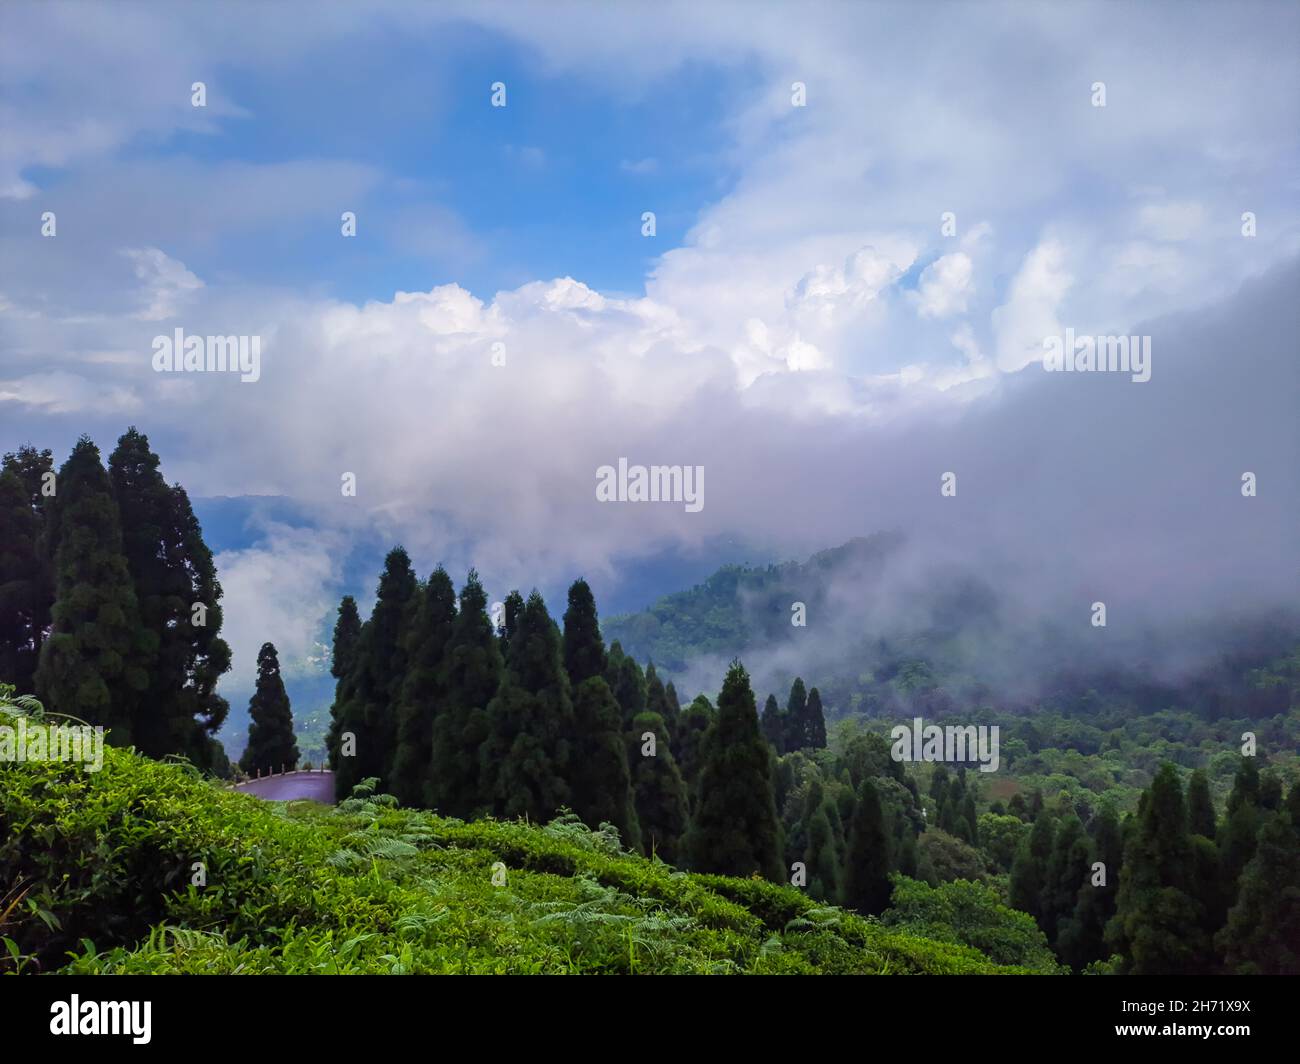 green mountain valley with blue sky and heavy cloud at morning image is taken at darjeeling west bengal india. Stock Photo